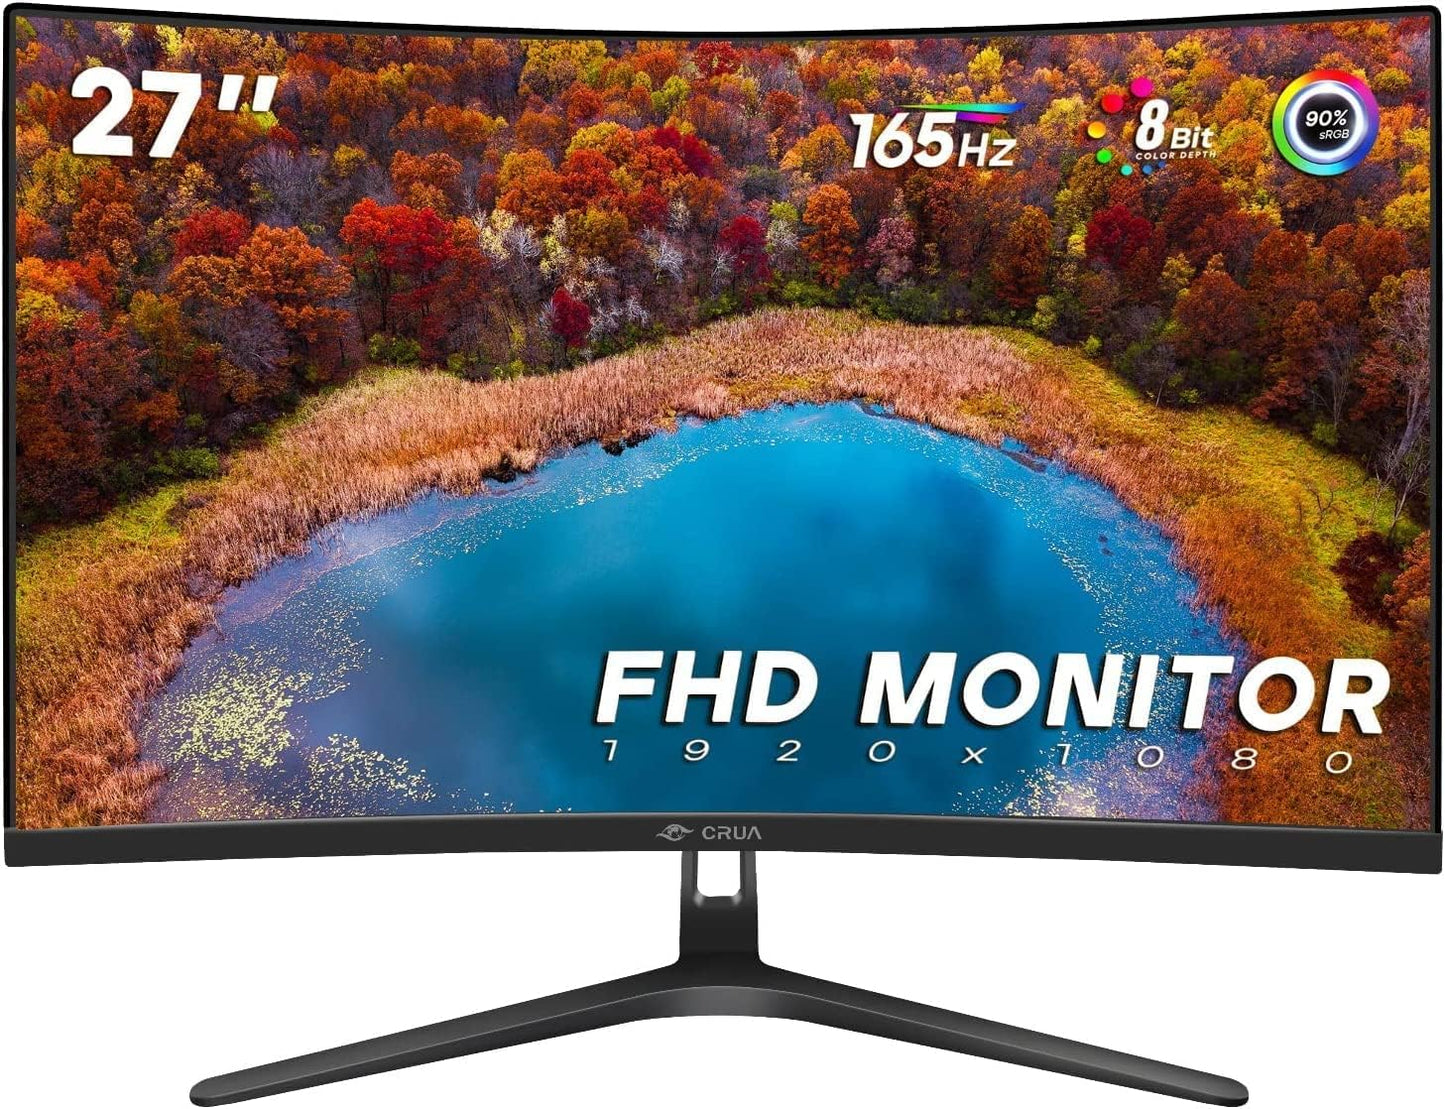 27 Inch 180HZ Curved Gaming Monitor, Full HD 1080P 1800R Frameless Computer Monitor, 1Ms GTG with Freesync, Low Motion Blur, Eye Care, VESA, Displayport, HDMI, Black